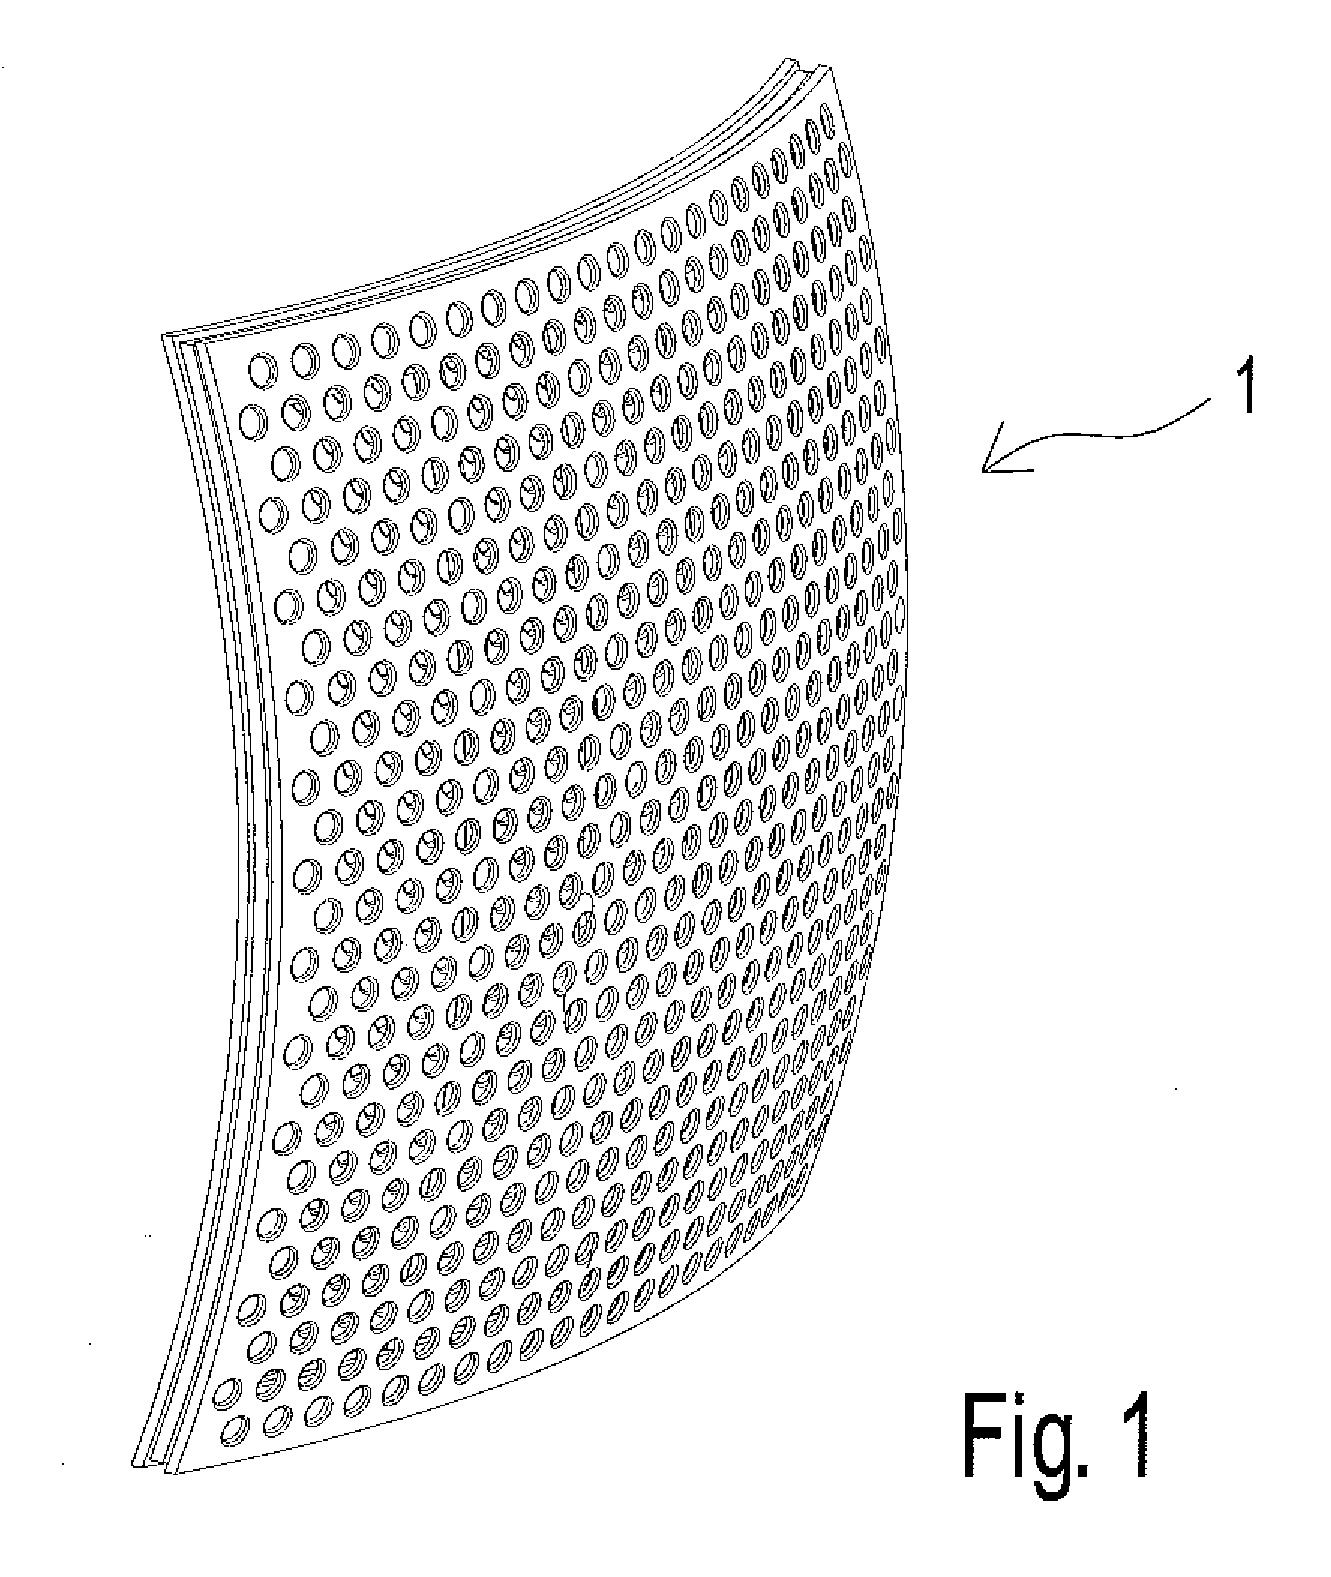 Electrostatic loudspeaker capable of dispersing sound both horizontally and vertically